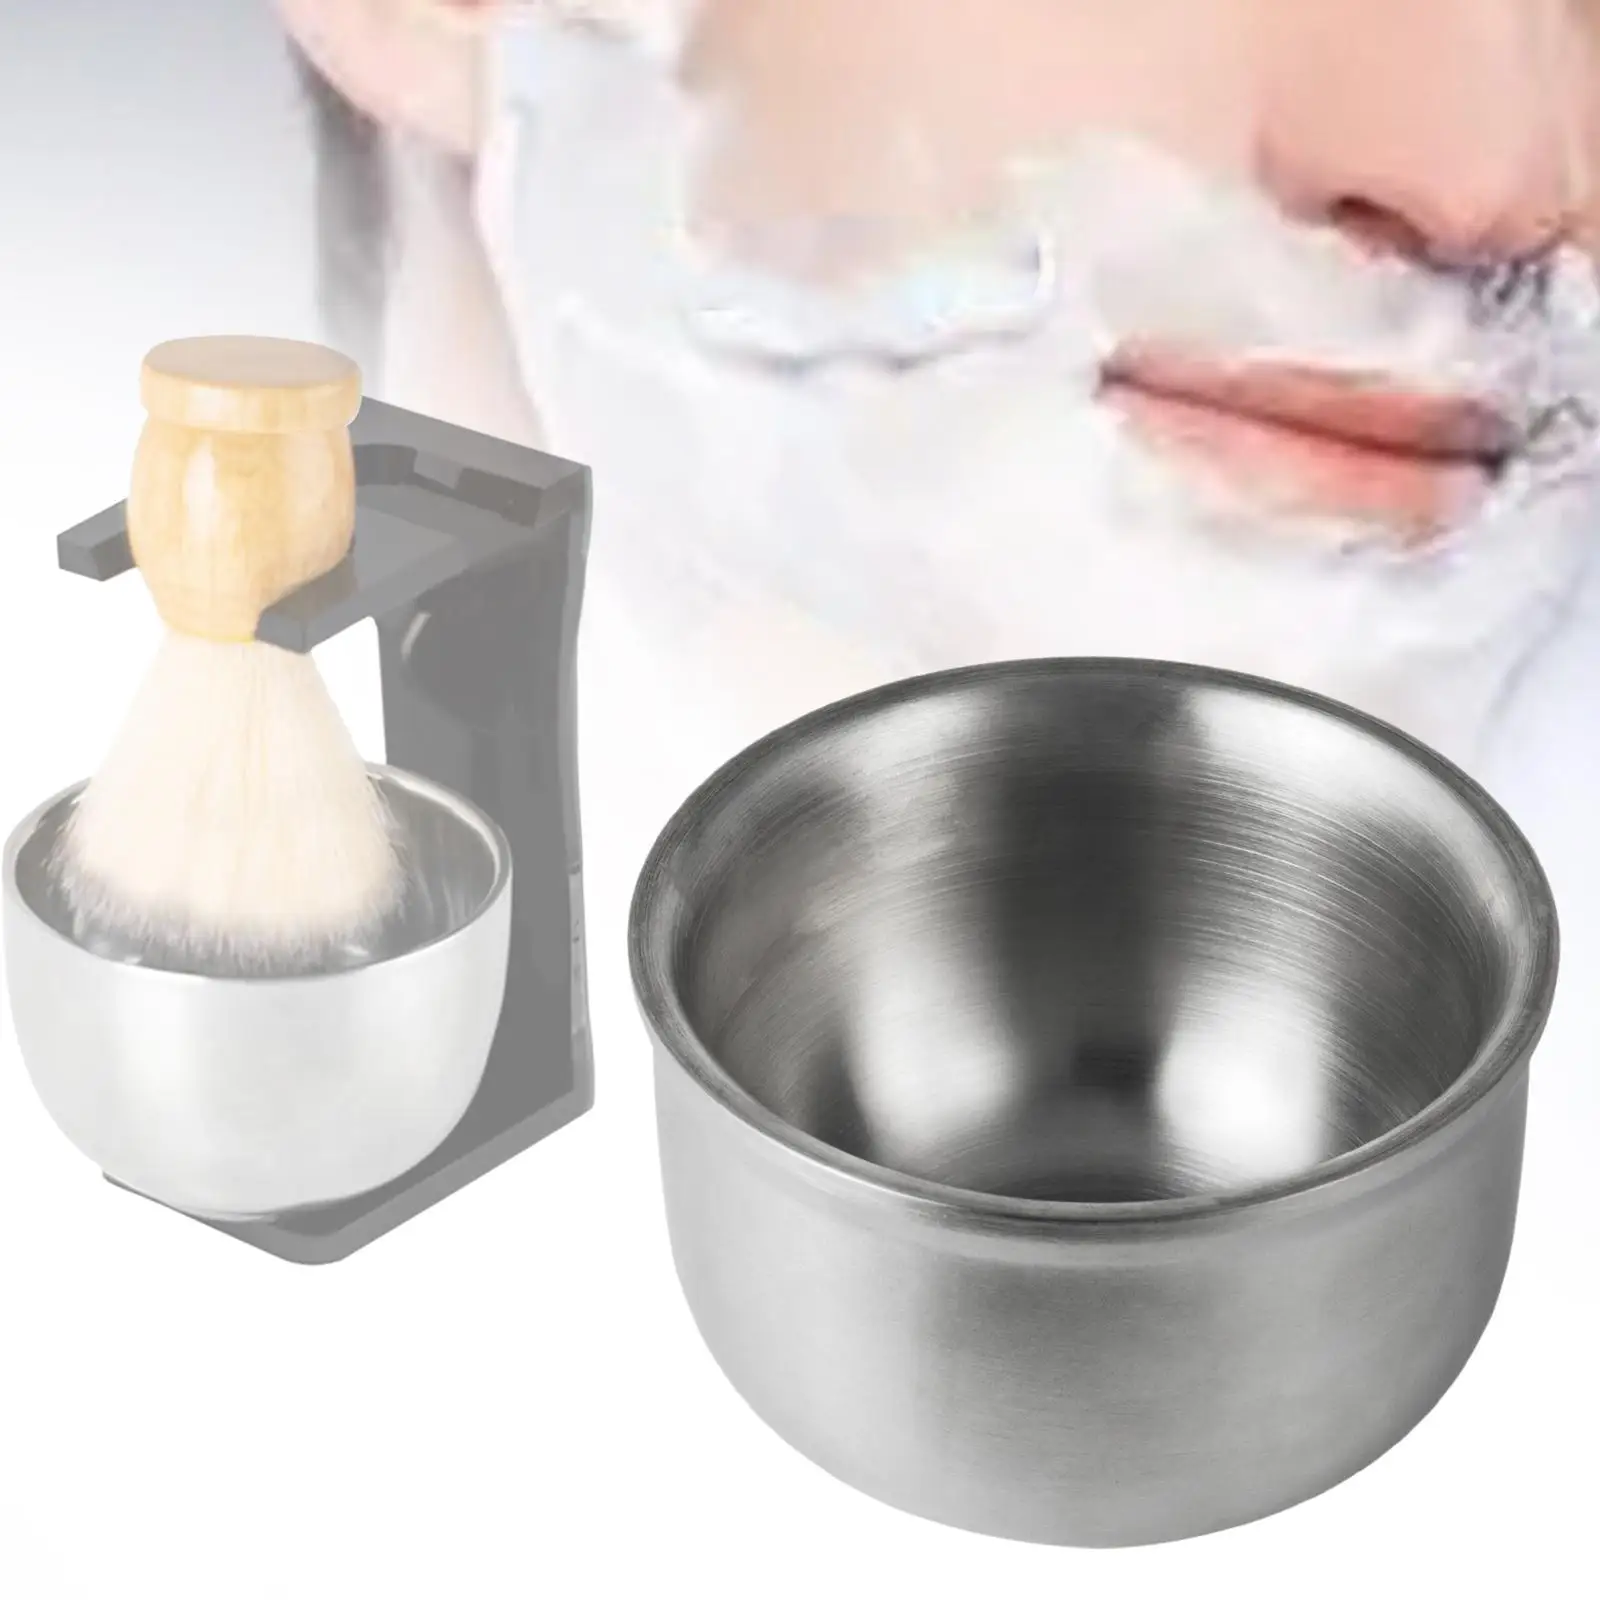 Shaving Bowl Easy to Lather Keep Warm Better Fits Wet Shaving Durable Heat Insulation Shaving Mug Shave Soap Cup for Gift Men